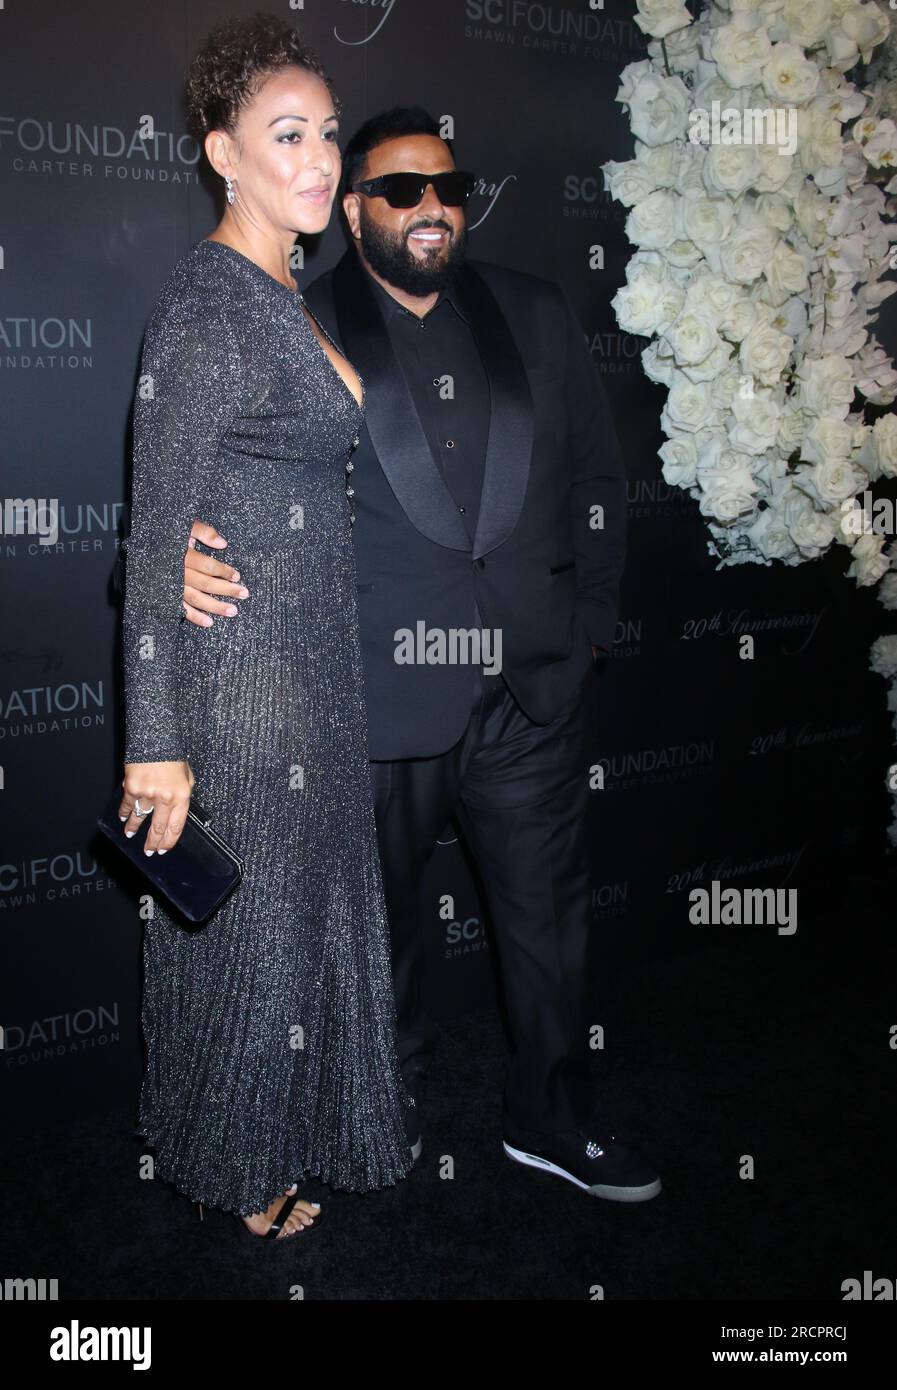 New York, NY, USA. 14th July, 2023. Dez Bryant and IIyne Nash at the Shawn  Carter Foundation 20th Anniversary Gala at Pier Sixty in New York City on  July 14, 2023. Credit